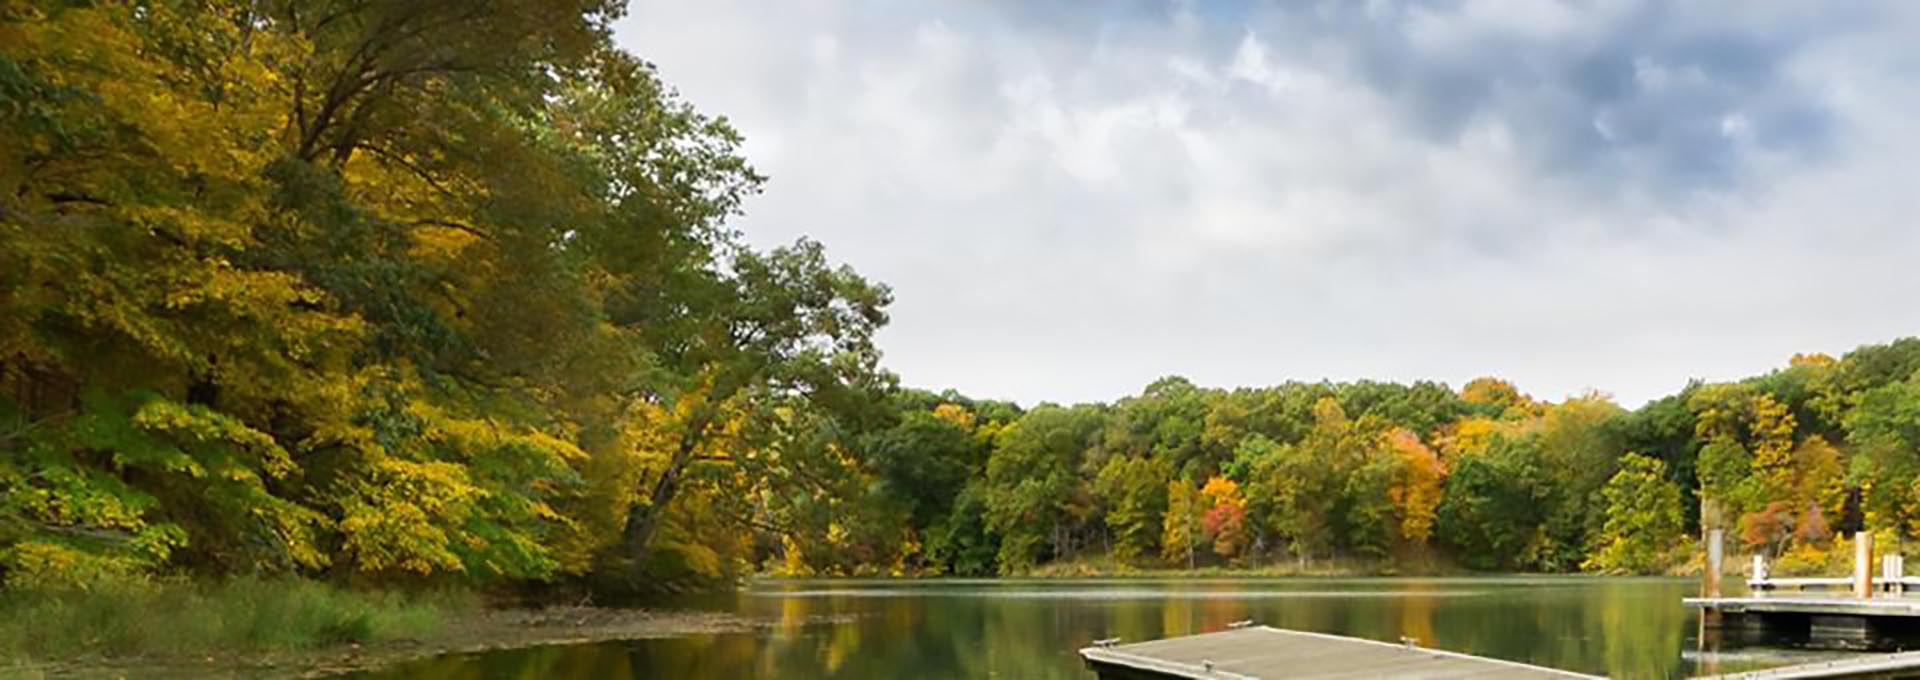 Plan a Park Visit in Downstate Illinois!